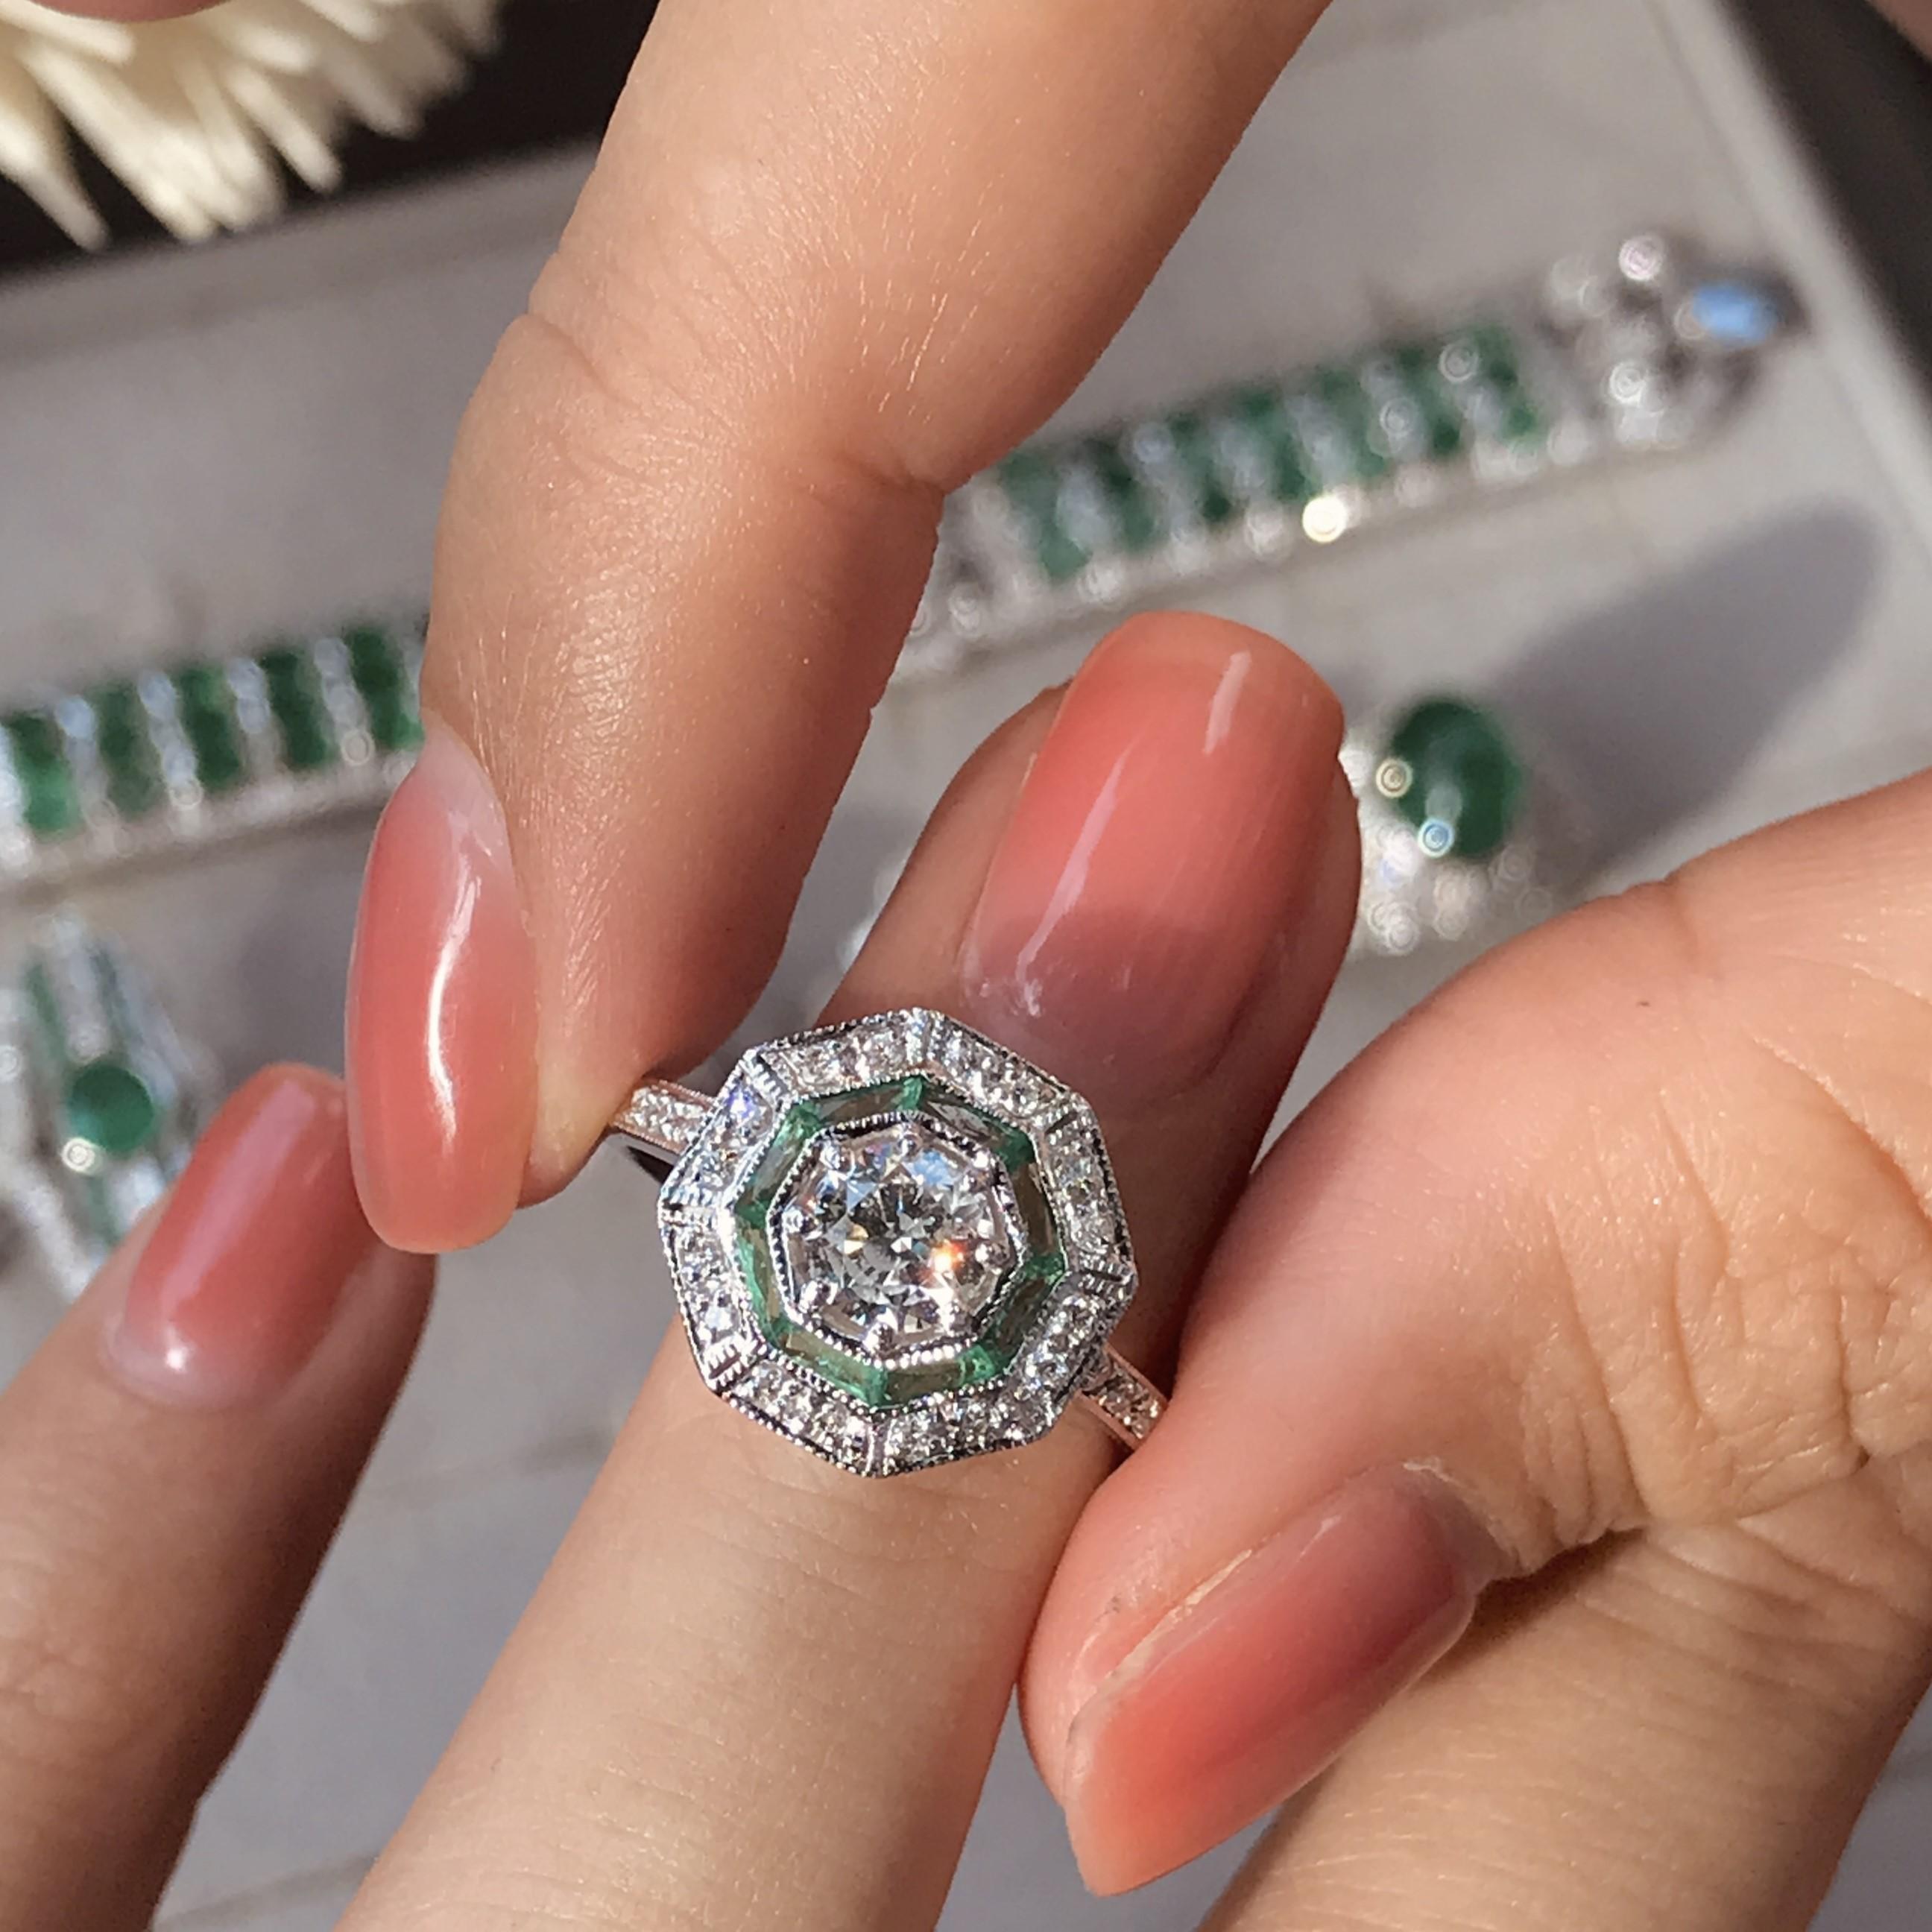 An 18k white gold Art-Deco design diamond and emerald target ring, center diamond with an outer ring of round diamonds an inner one of French cut emeralds and finished with millgrain edging, finished with diamond shoulders.

Ring Information
Style: